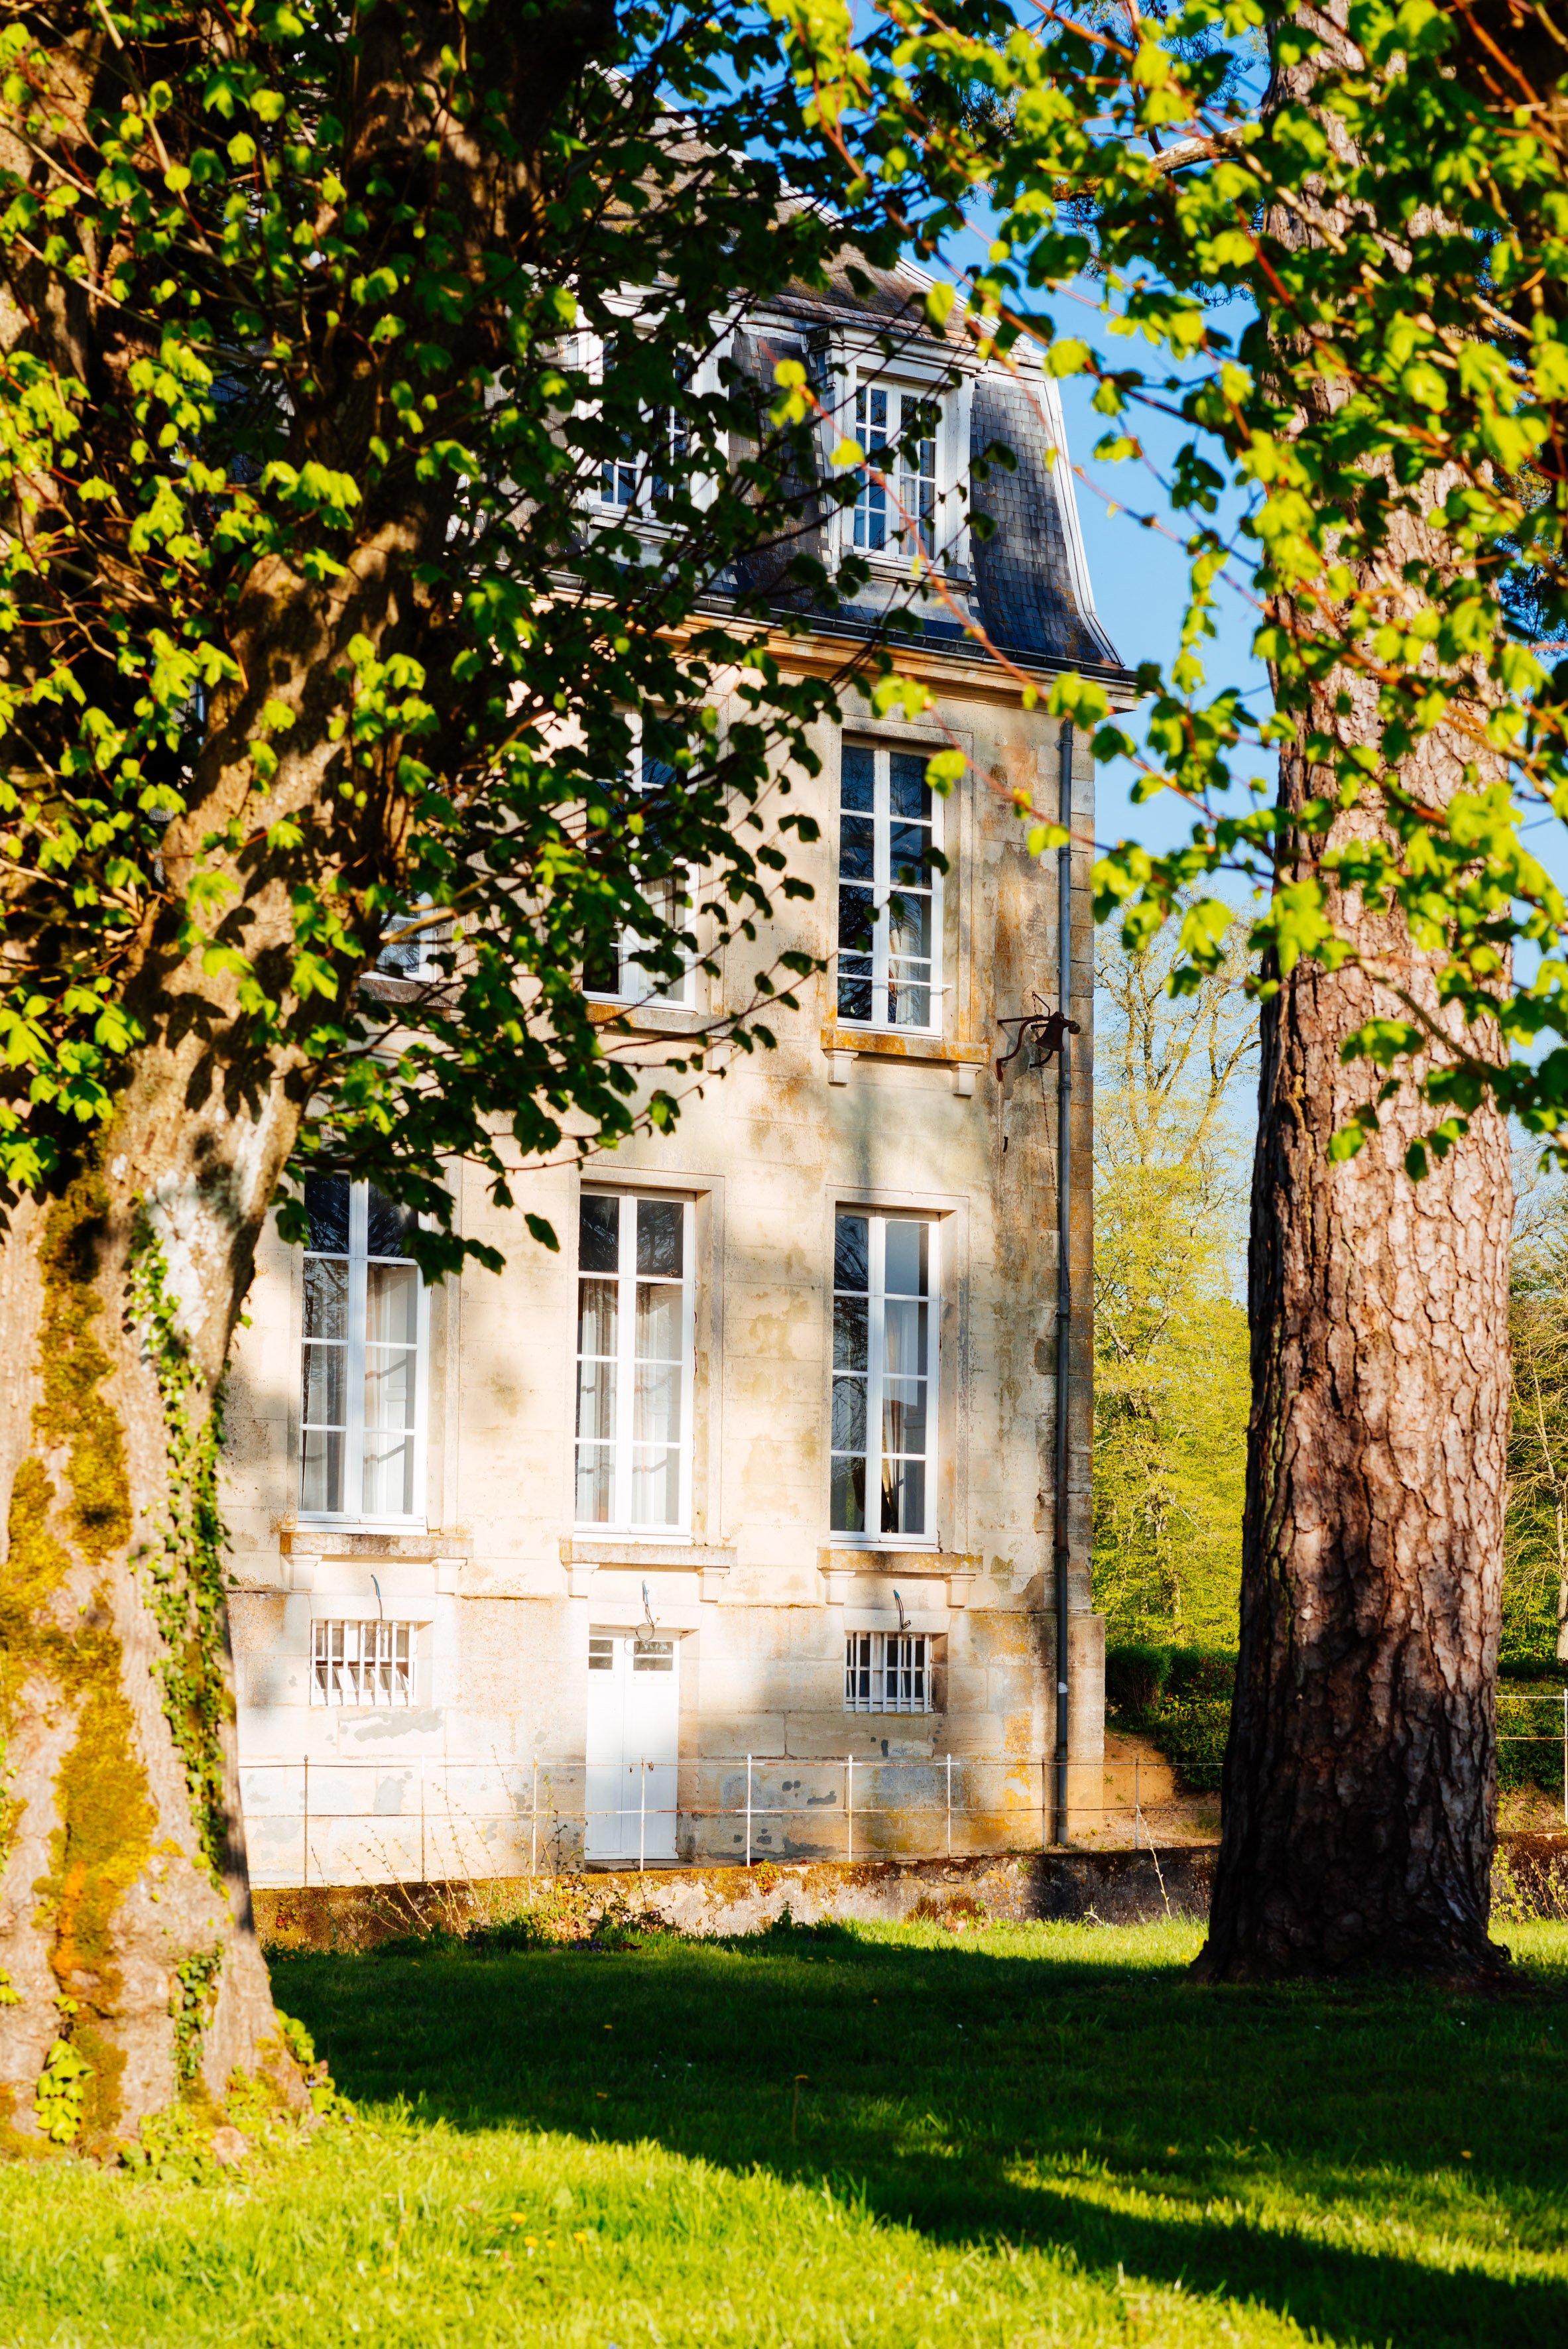 The west wing of Chateau de Courtomer viewed through the Sycamore trees. To rent for weddings, retreats and other events.